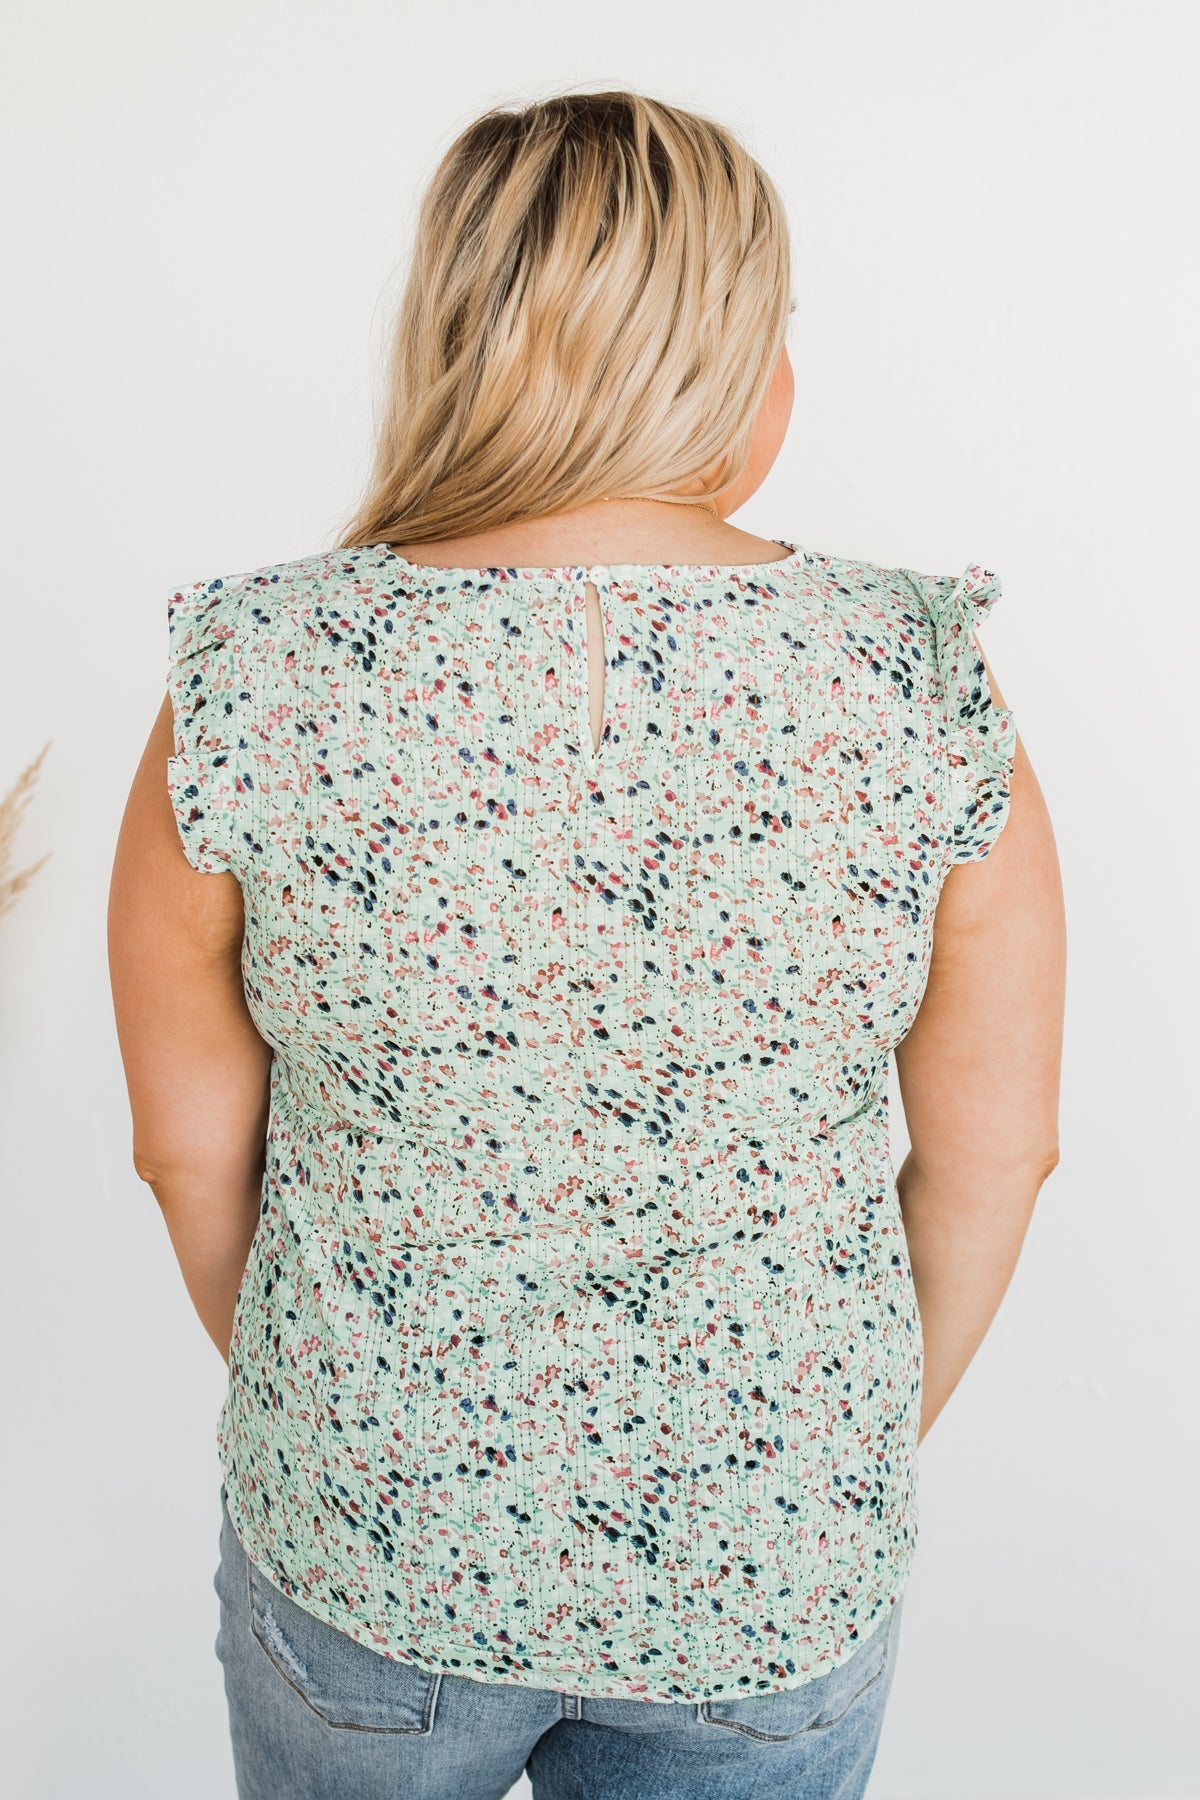 Spring Into Love Sleeveless Blouse- Mint